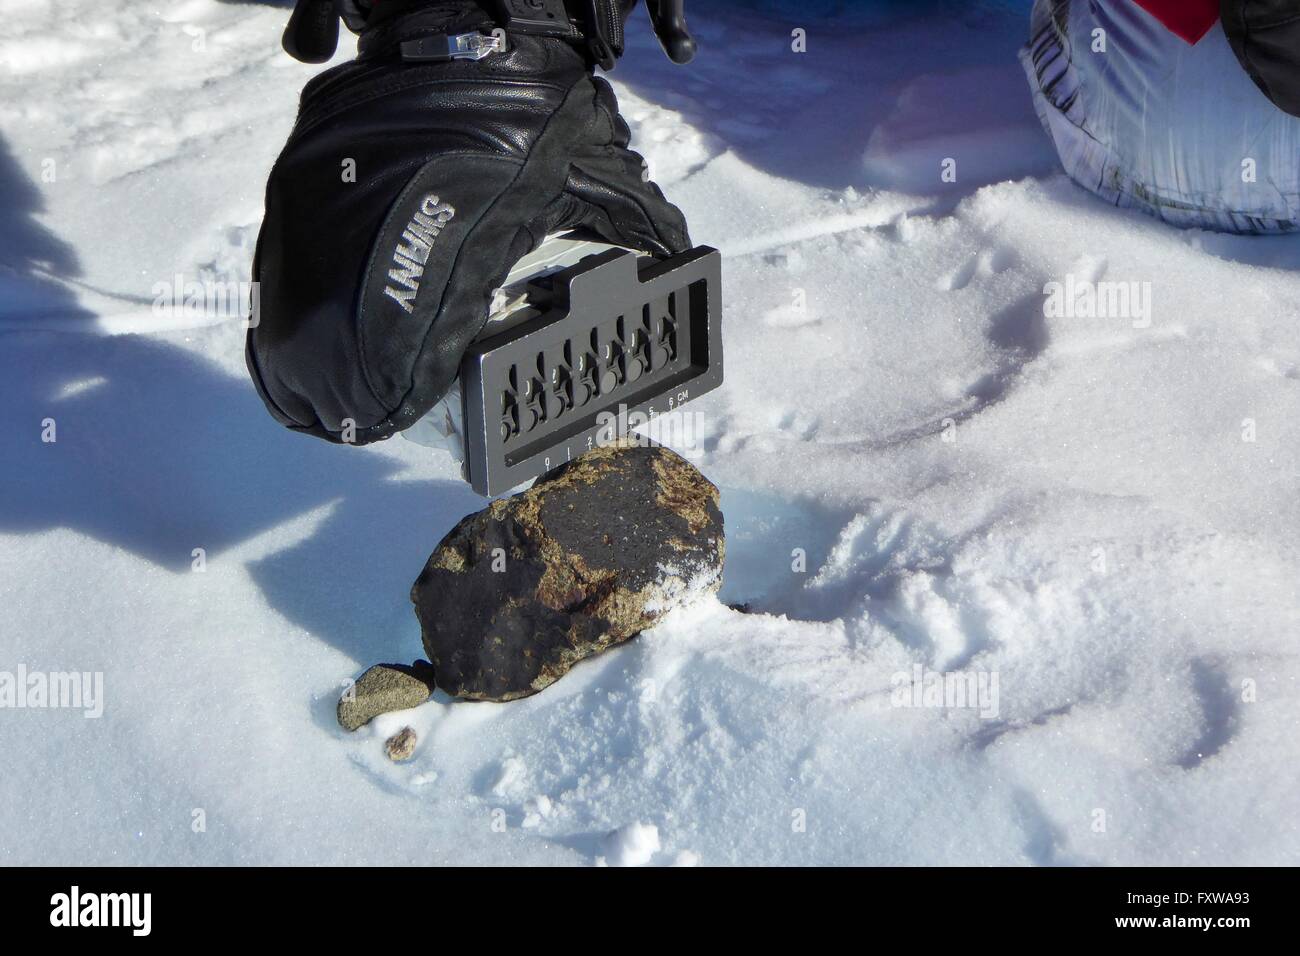 Researchers examine a meteorite found on the blue ice field in the Miller Range distinguished from earth rocks by the black fusion crust caused when the rock enters the Earth's atmosphere December 30, 2015 in Antarctica. Scientists collected 570 meteorite samples during a two-month expedition as part of the Antarctic Search for Meteorites program. Stock Photo